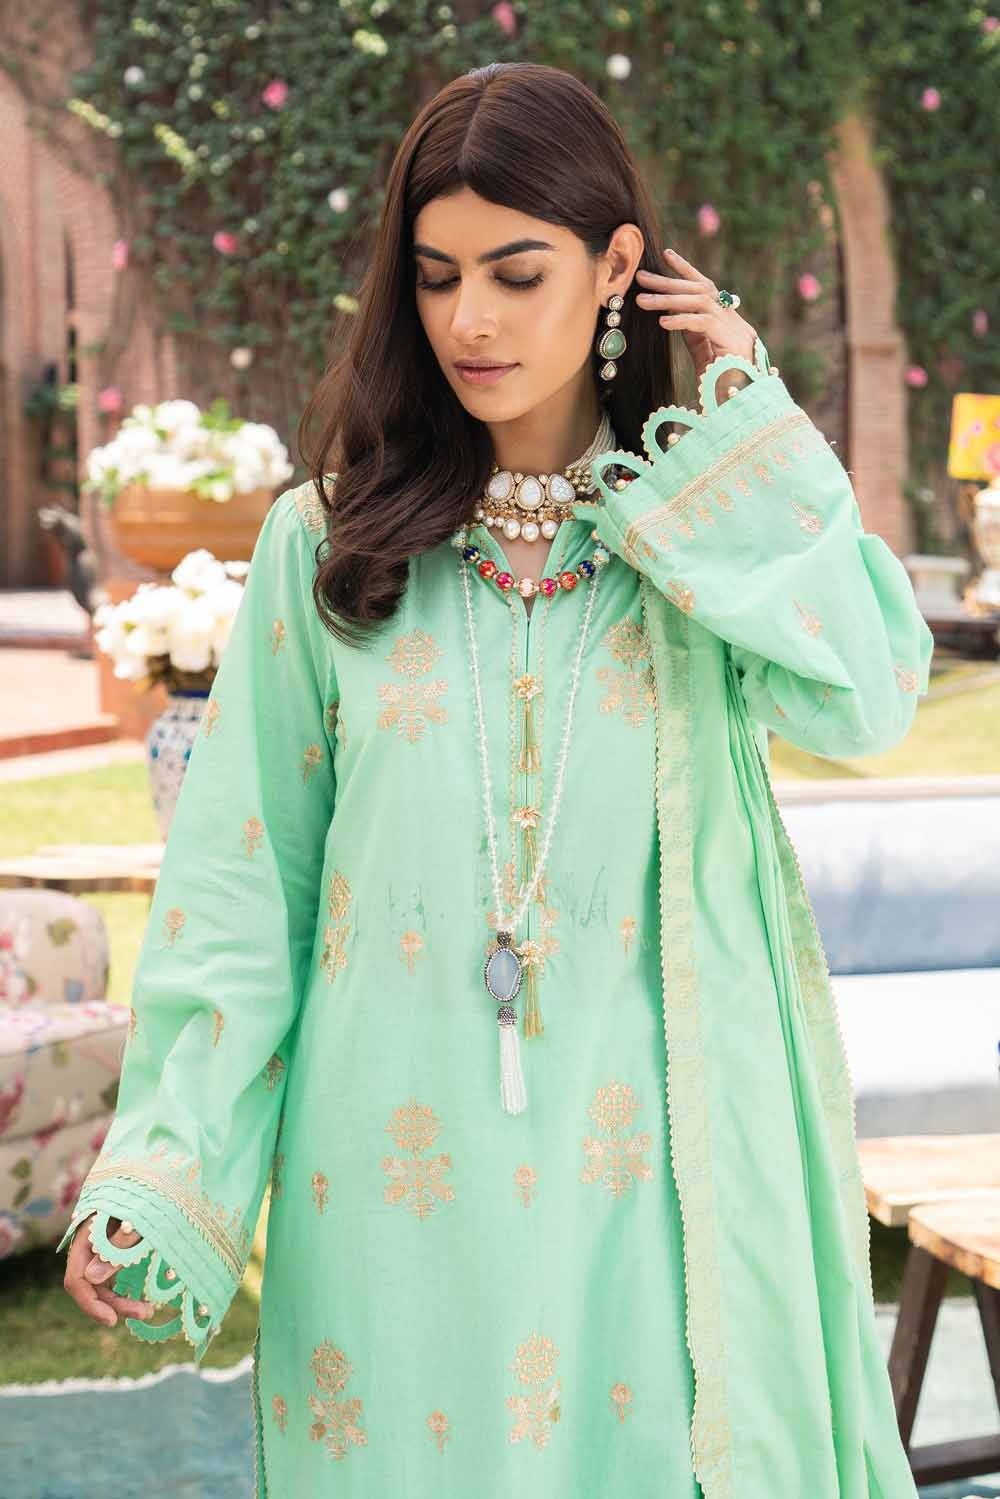 Gul Ahmed Ready To Wear 3 PC Embroidered Lawn Suit with Jacquard Dupatta FE-12139